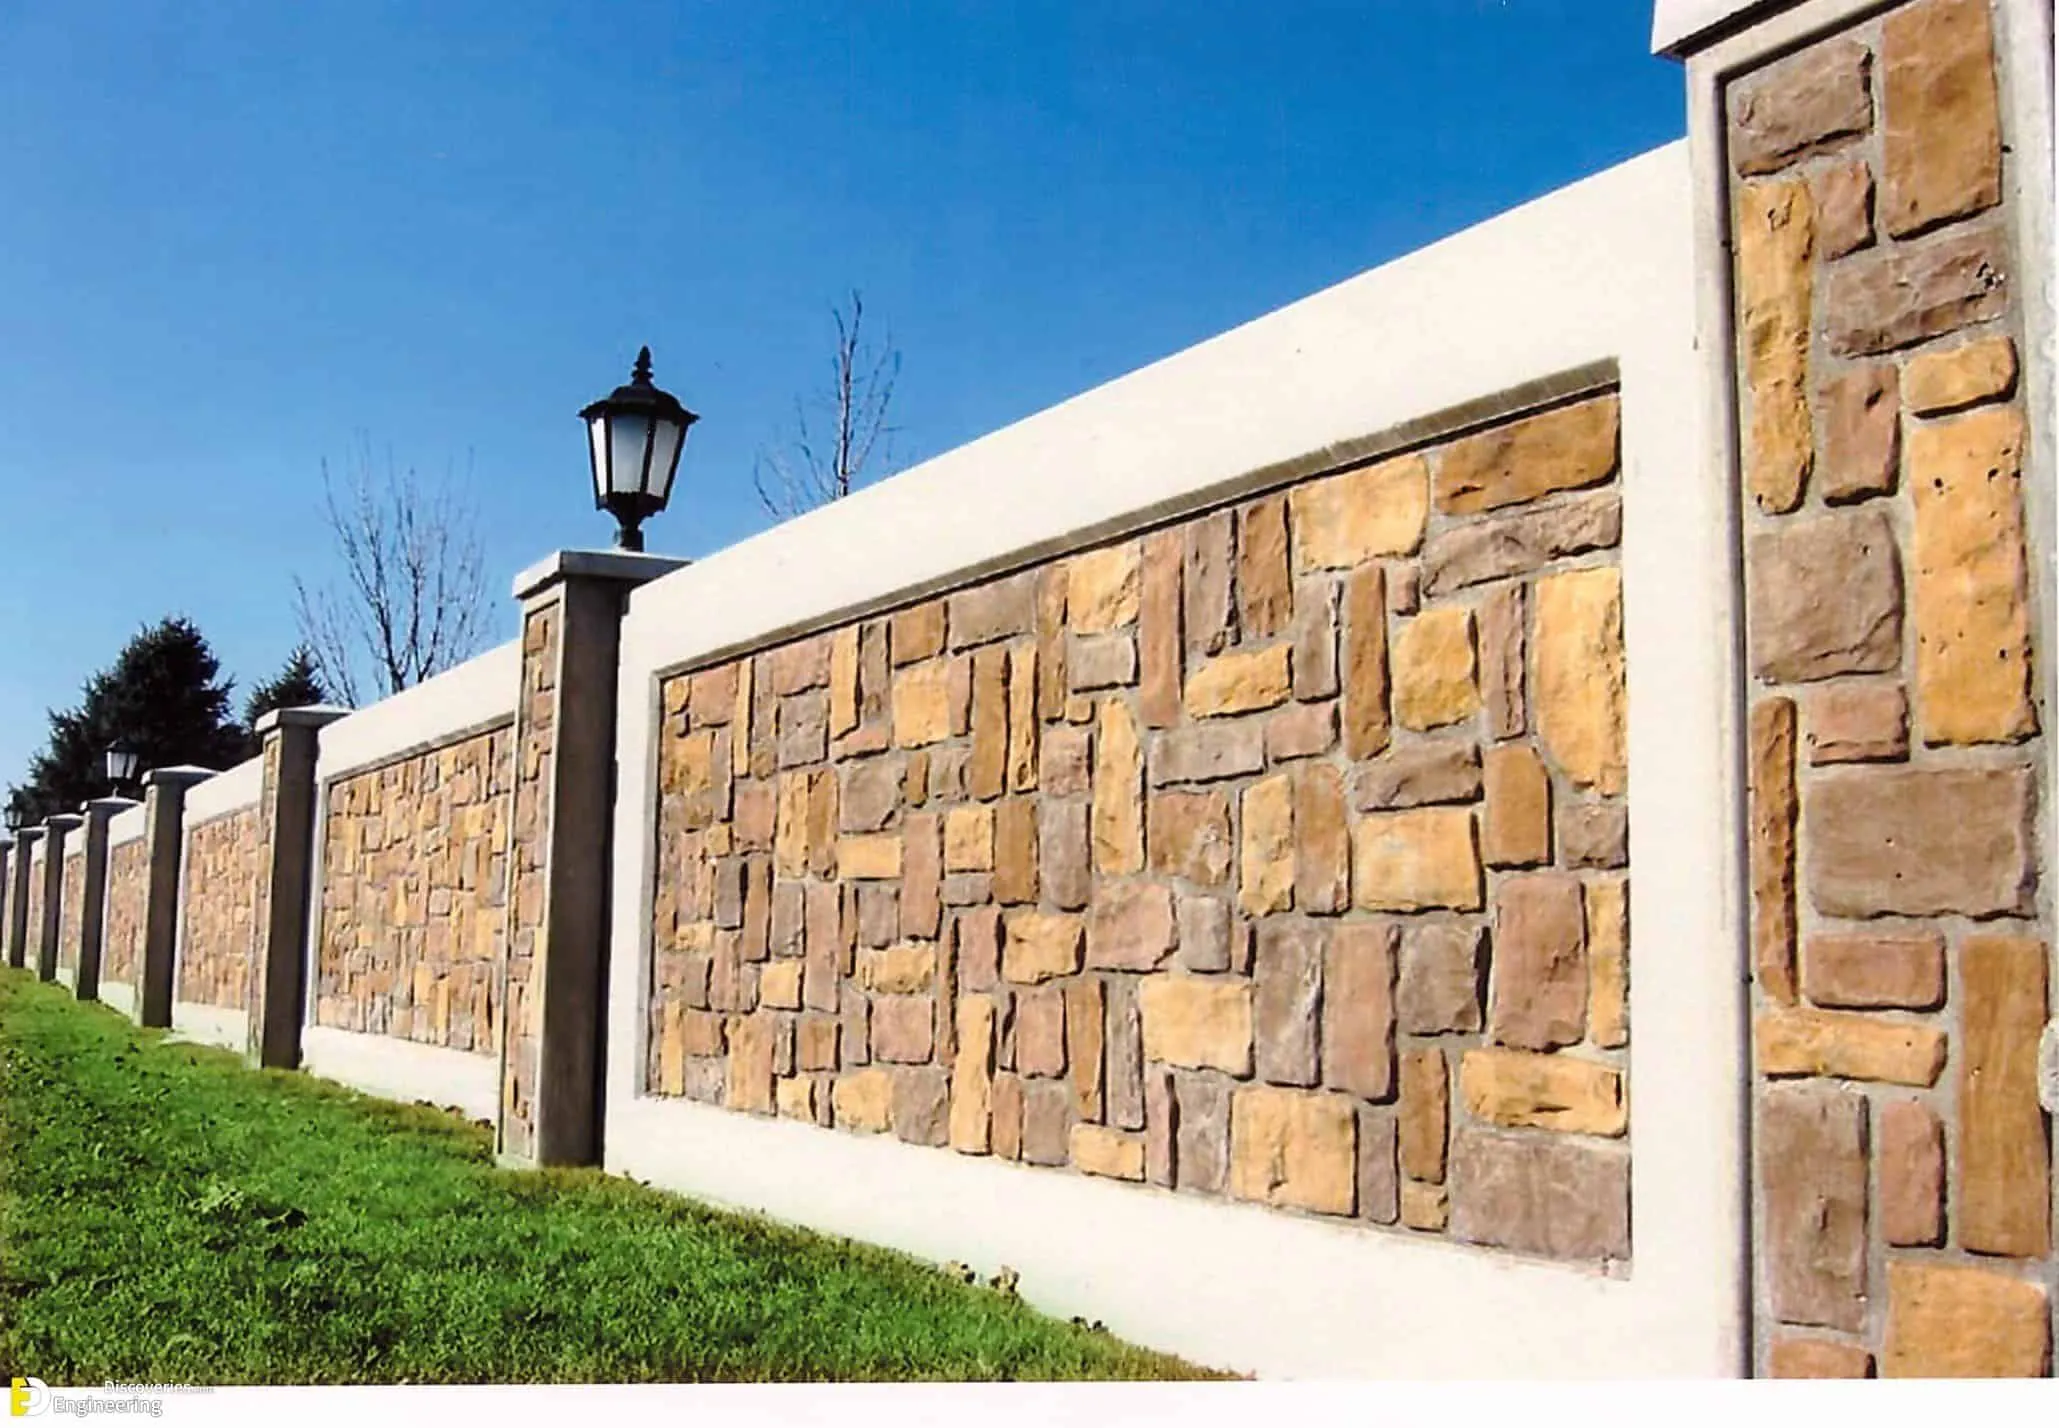 stone cladding used gives a rustic and an earthy effect to the decor of the boundary